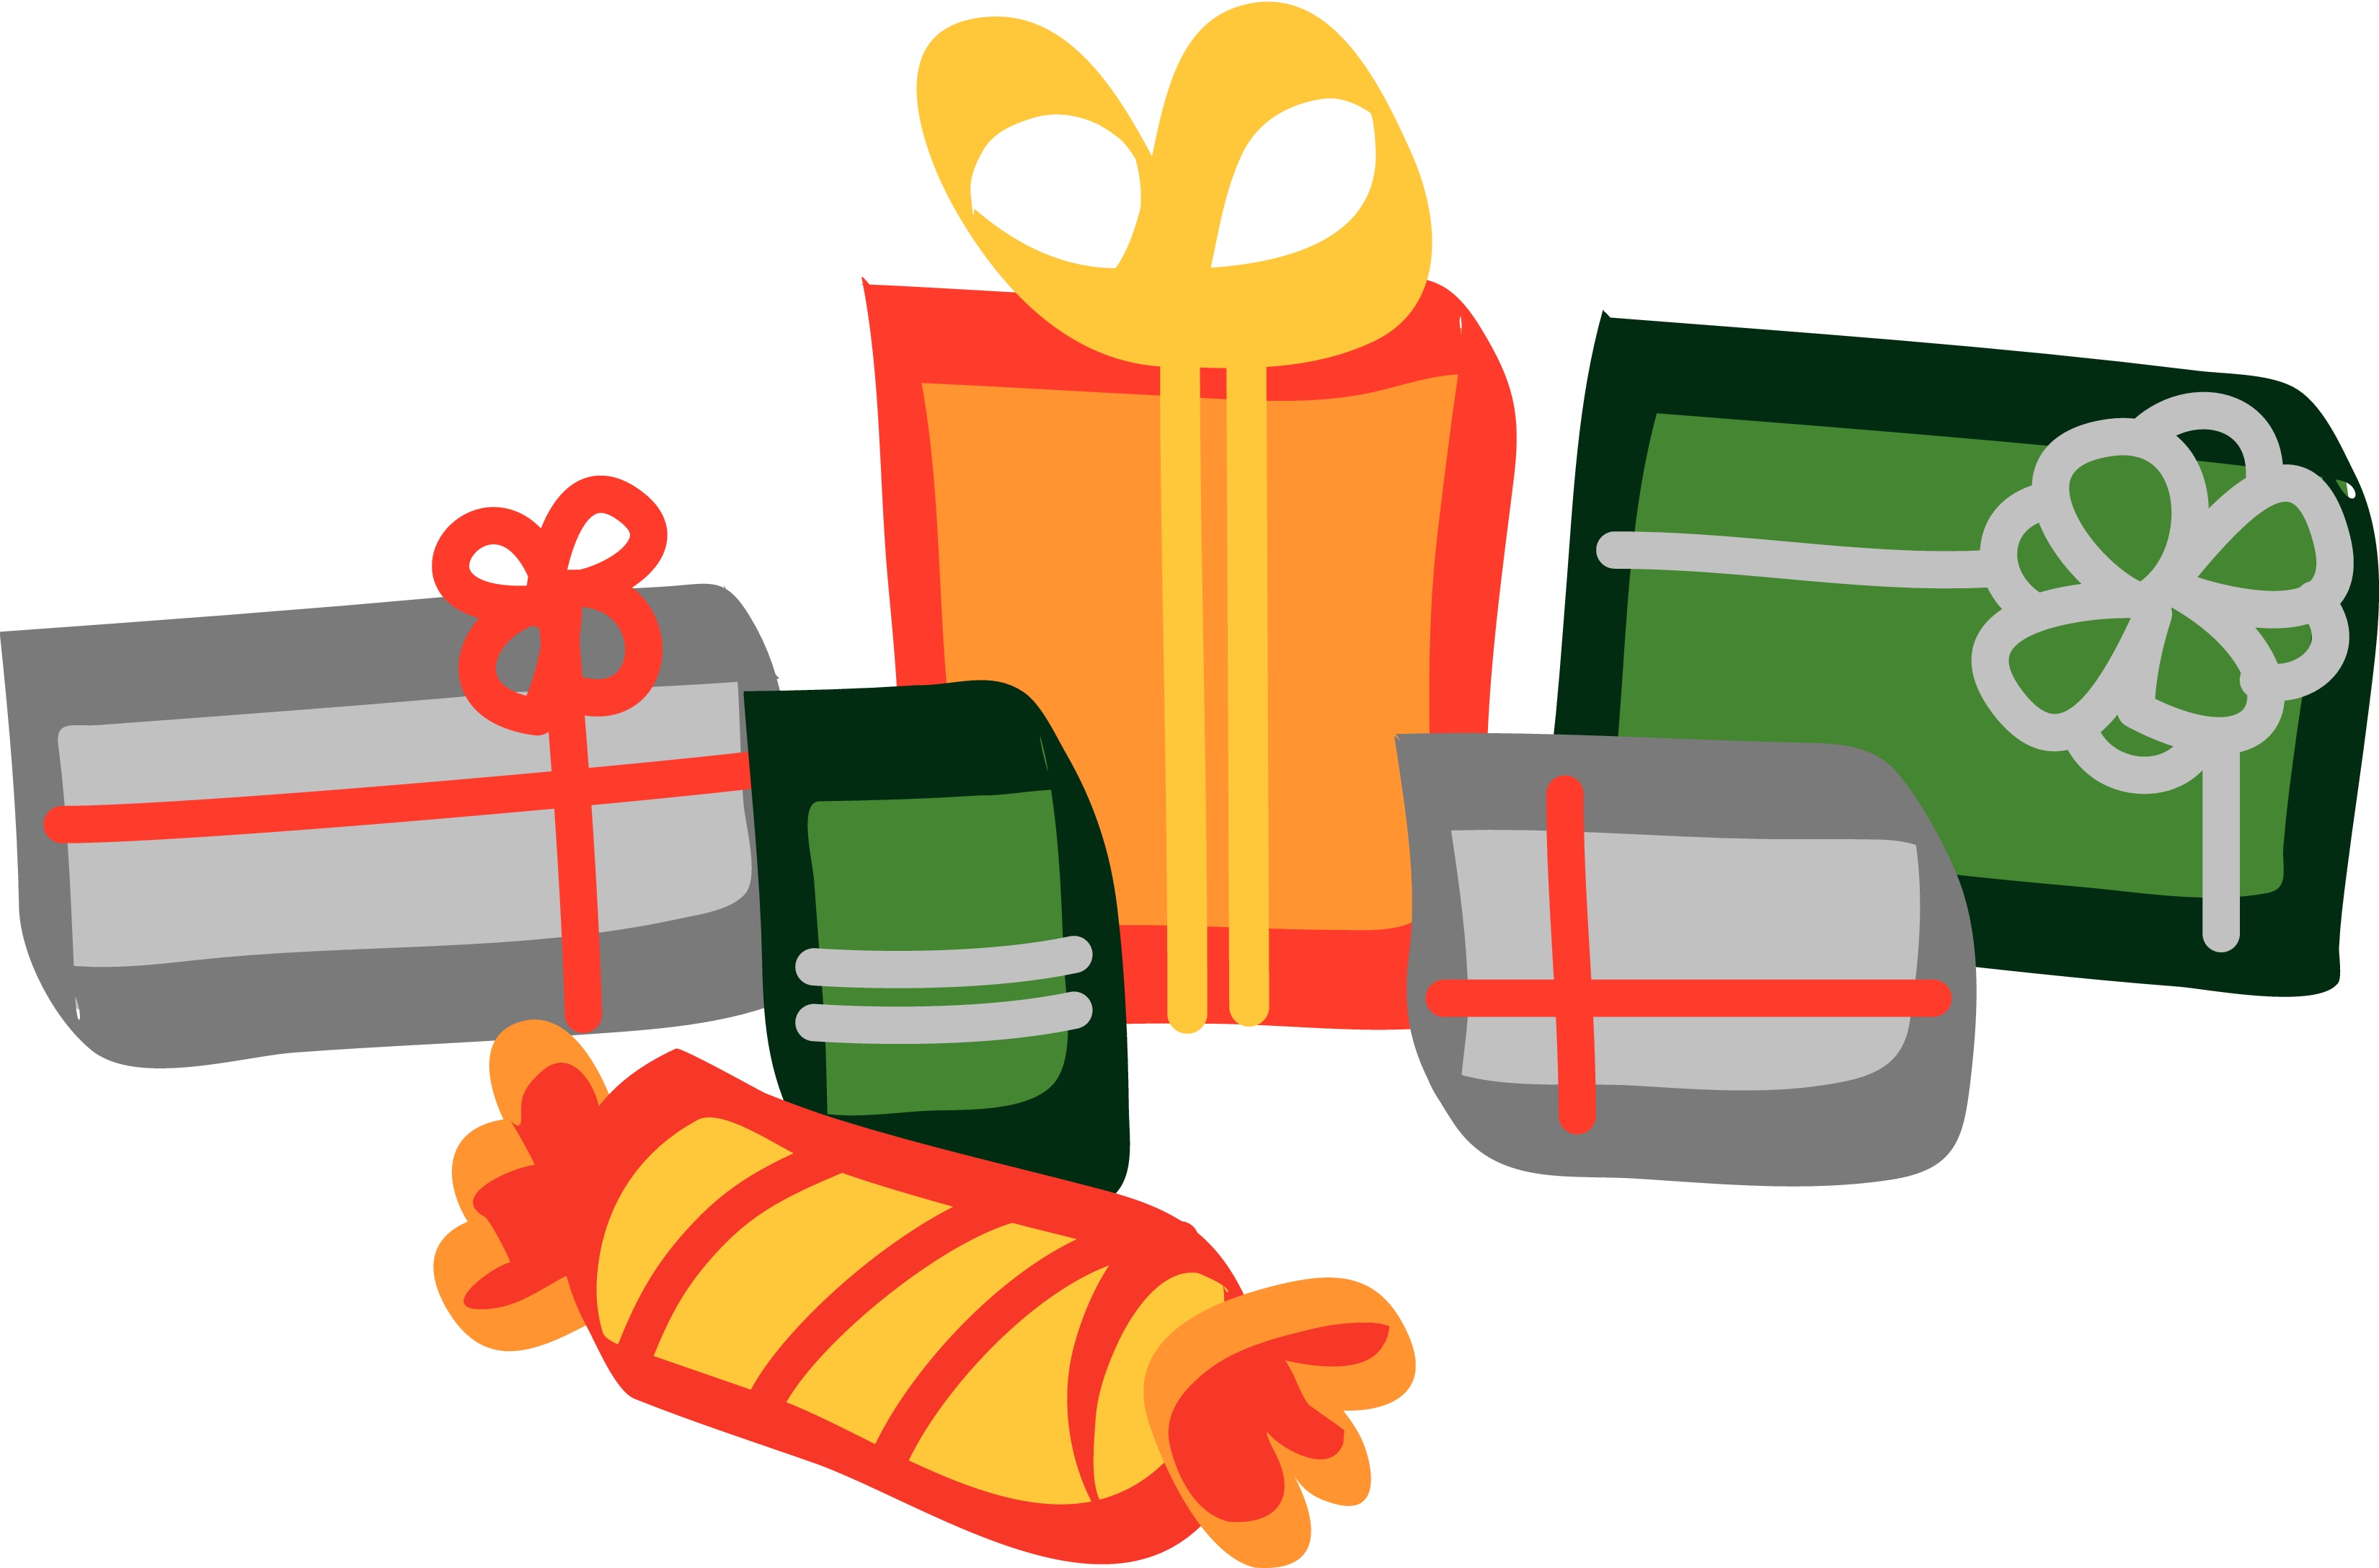 Free Images Of Presents, Download Free Images Of Presents png images